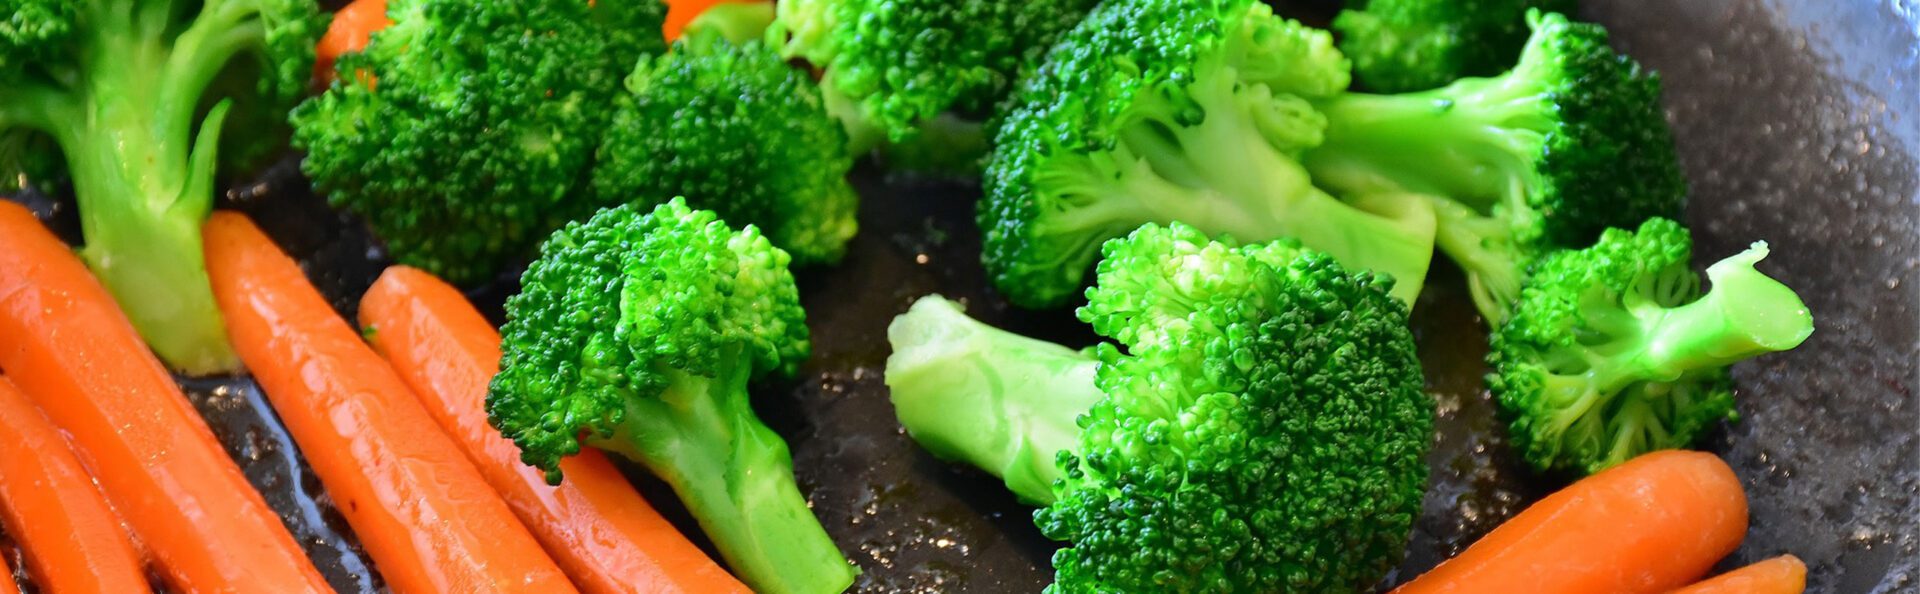 A close up of broccoli in a bowl